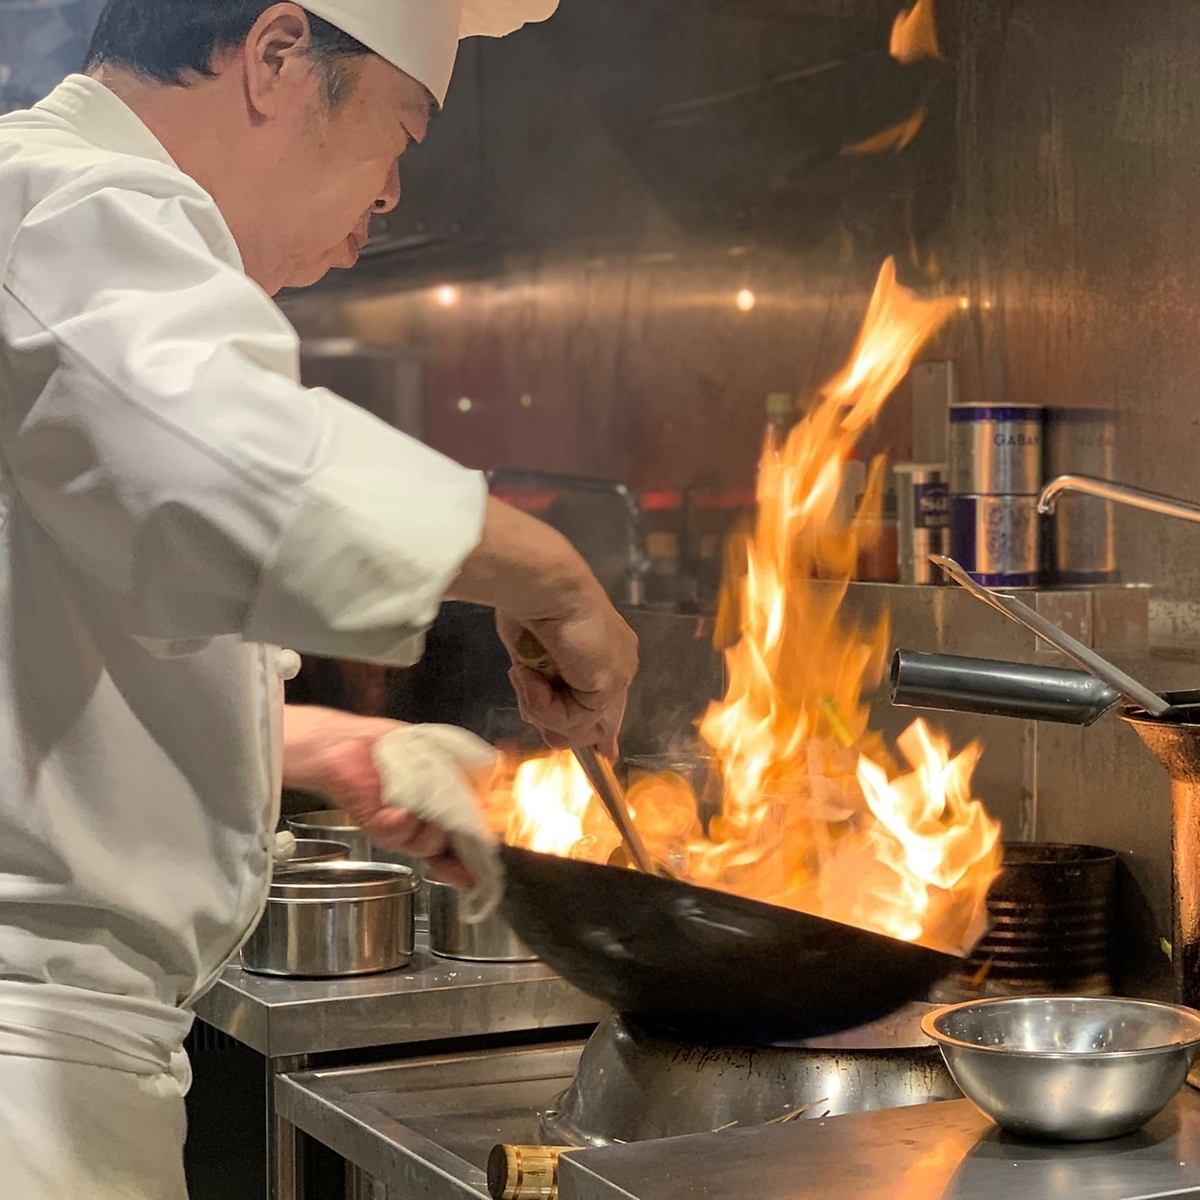 Enjoy authentic Chinese cuisine and a variety of sake by Chef Takahashi, who has extremely 40 years of experience in Sichuan cuisine!